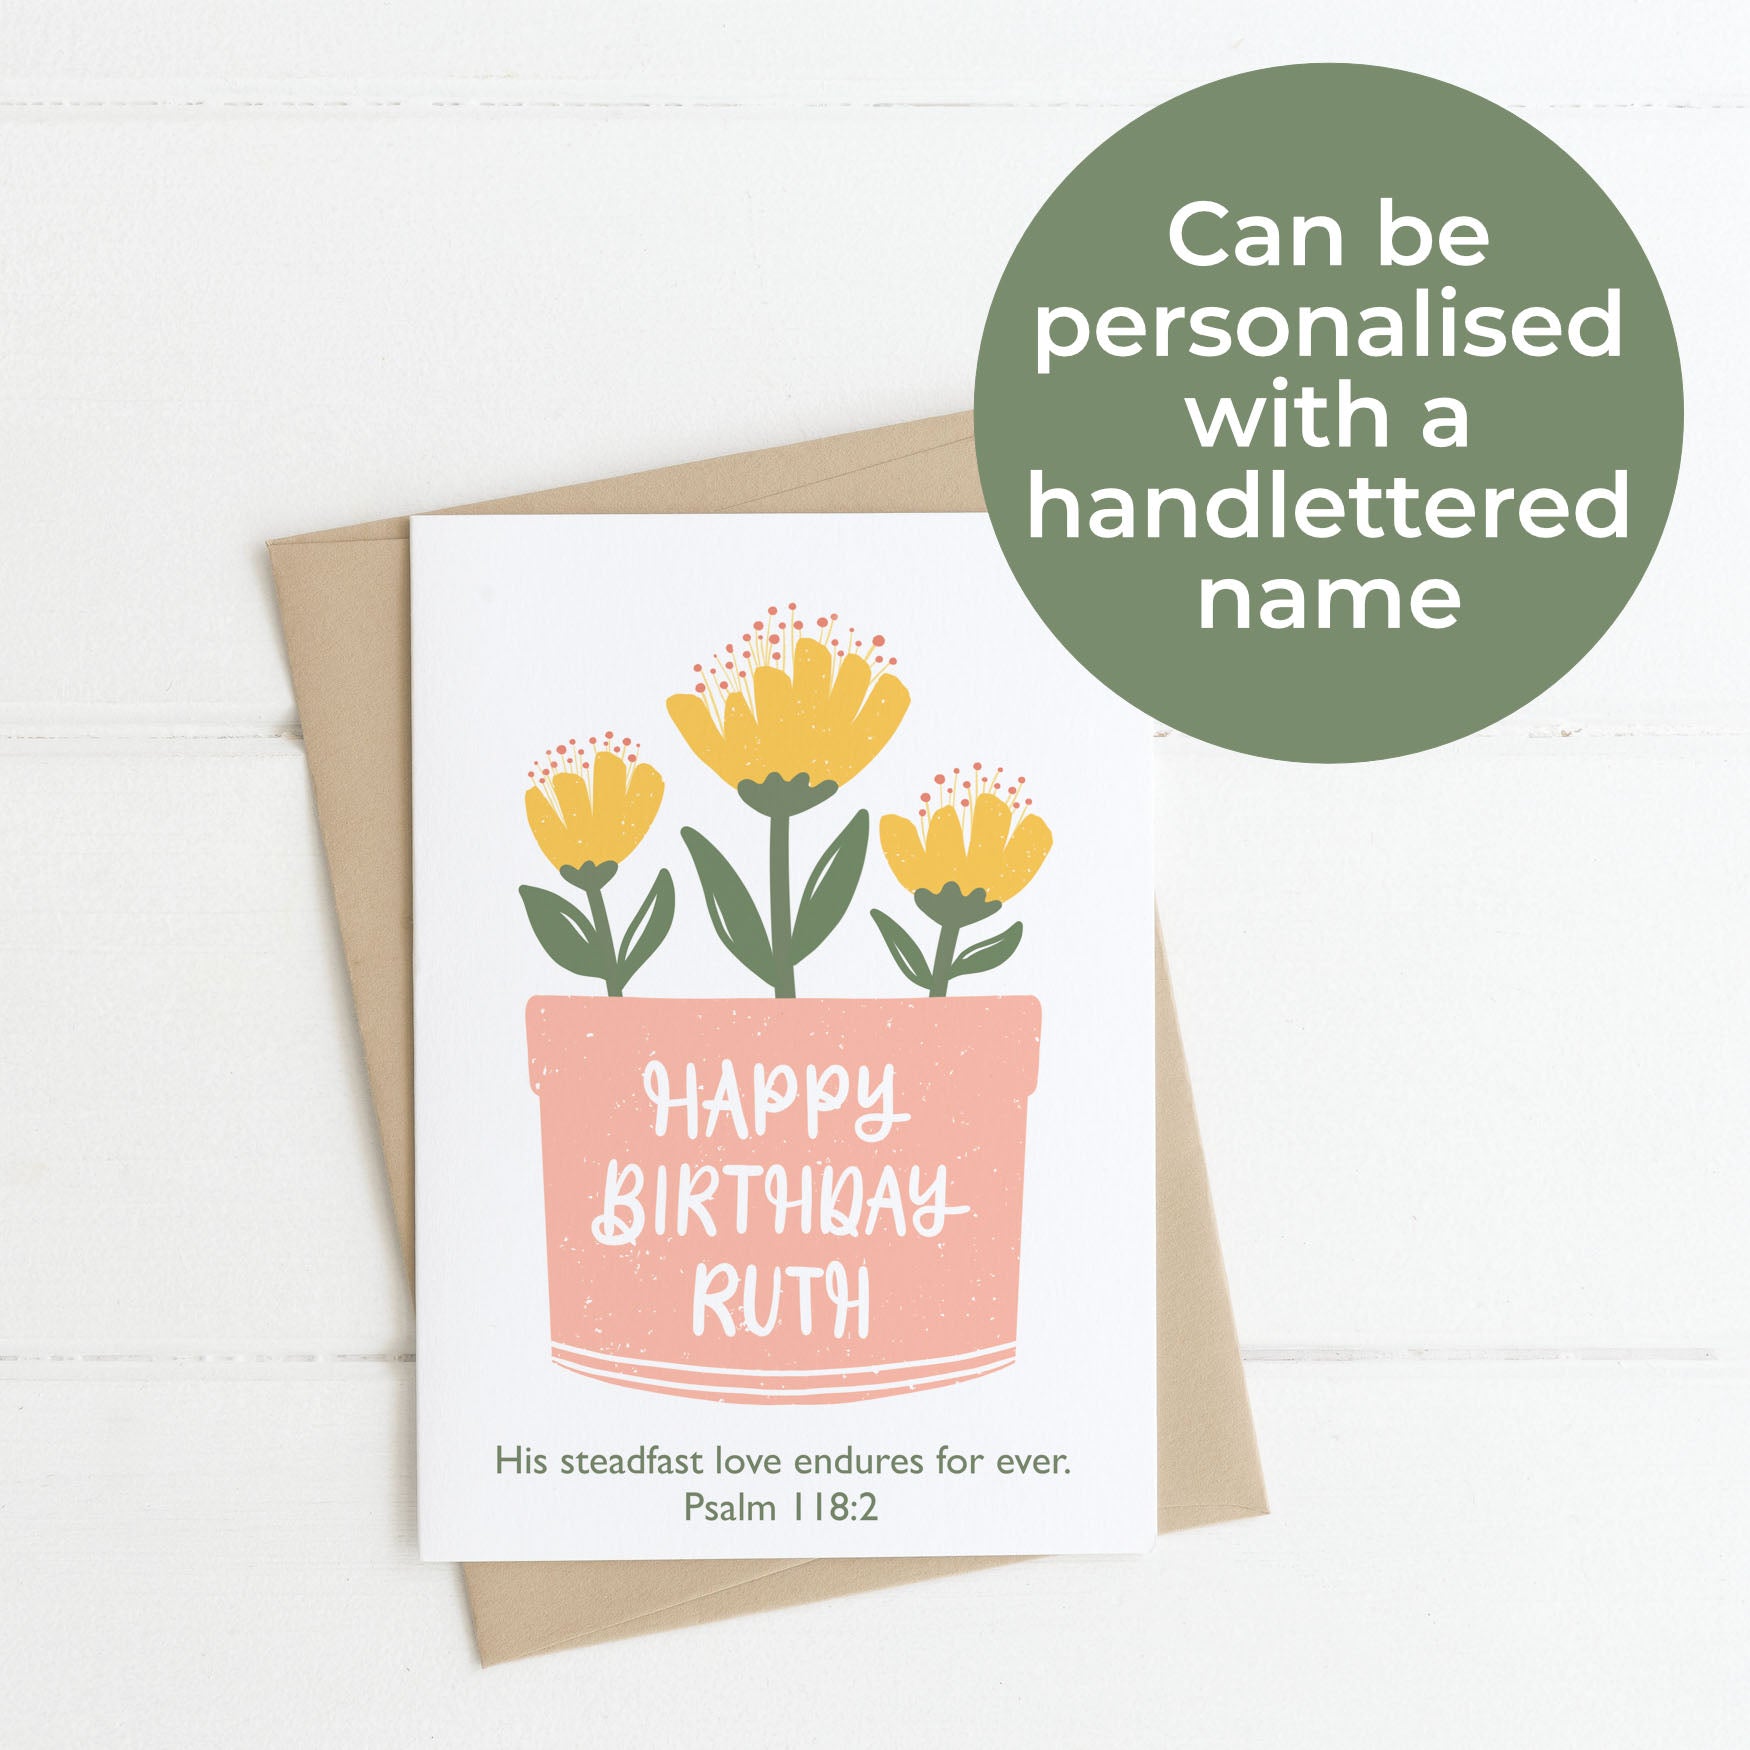 Personalisable Flowerpot Bible Verse Birthday Card - Psalm 118:2 with handlettered name